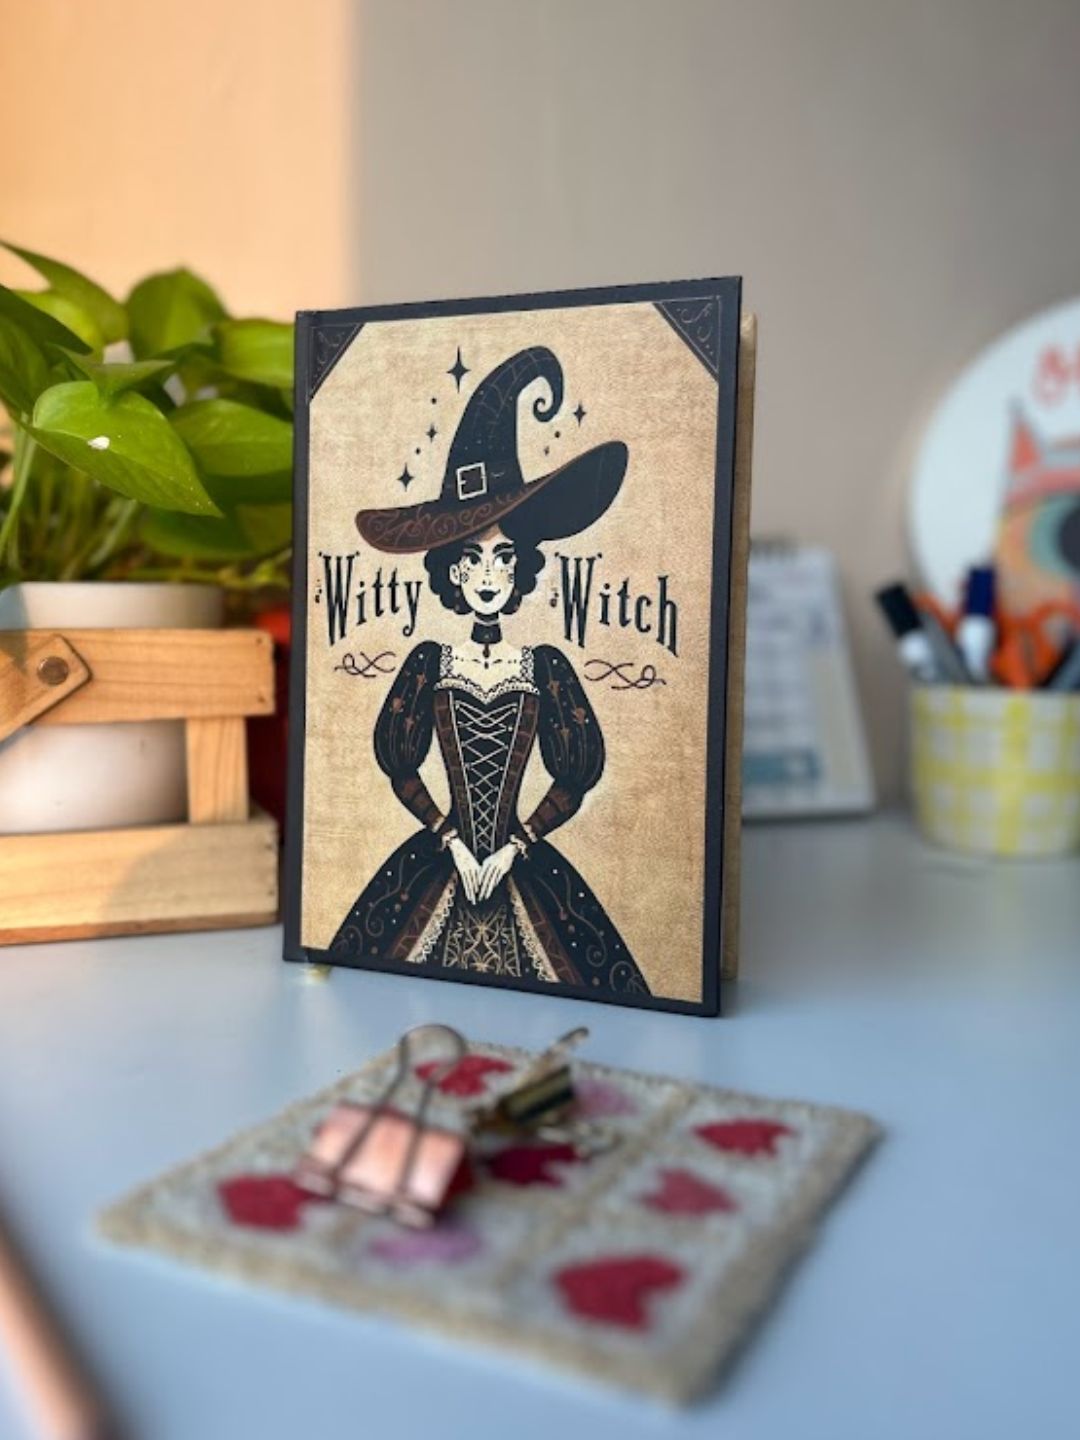 The Witty Witch Journal